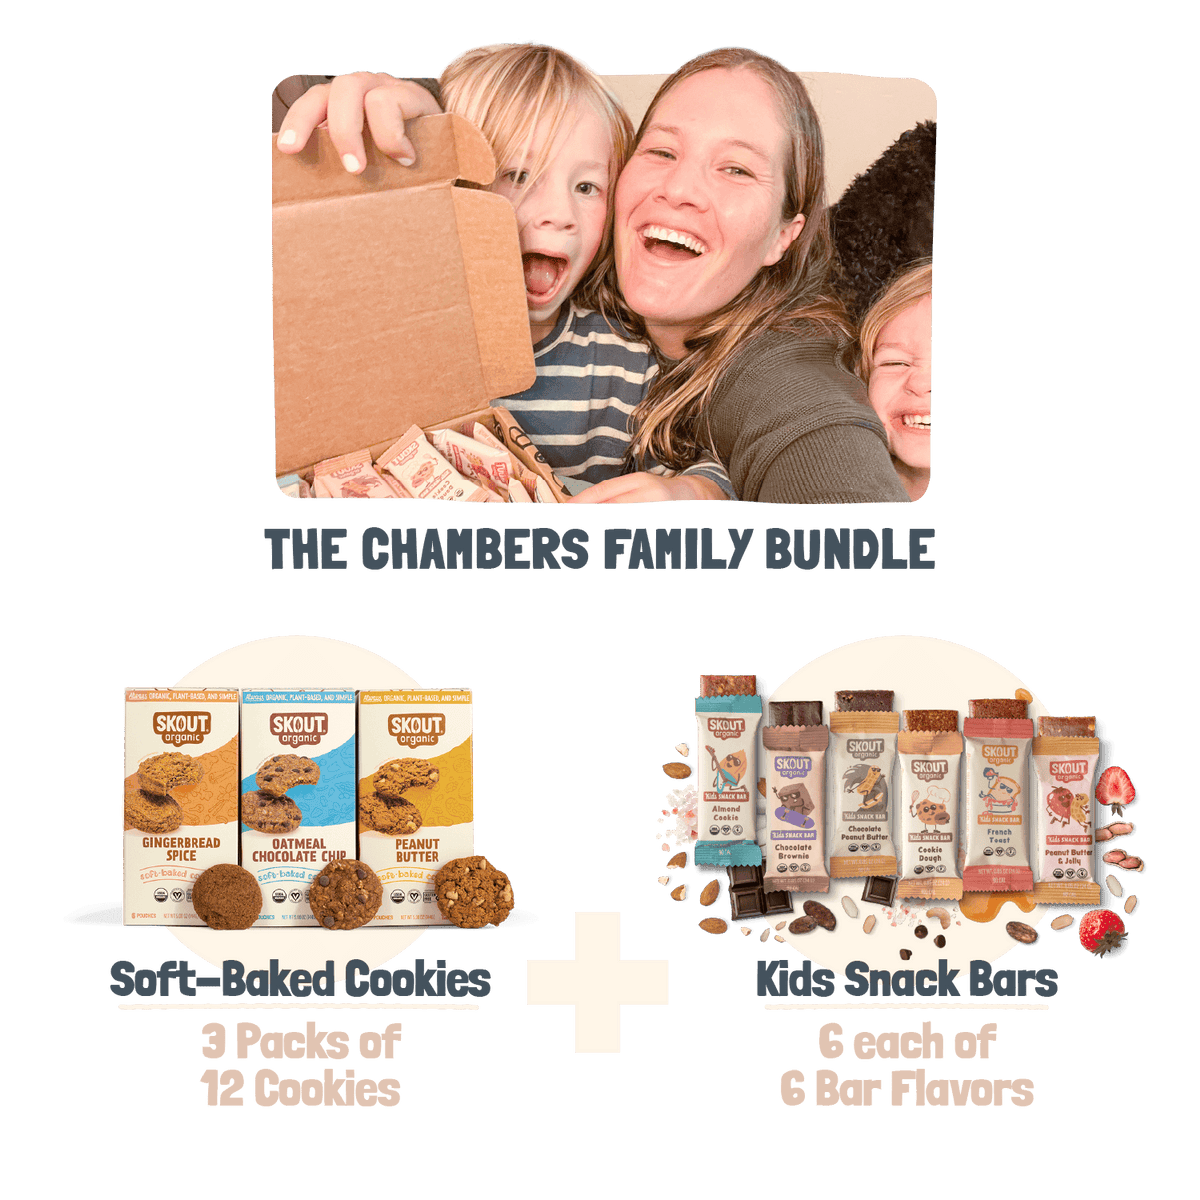 Skout Organic Chambers Family Favorites Bundle Organic Kids Bars Skout Organic 36 Pack of Kids Bars + 3 Boxes of Cookies 